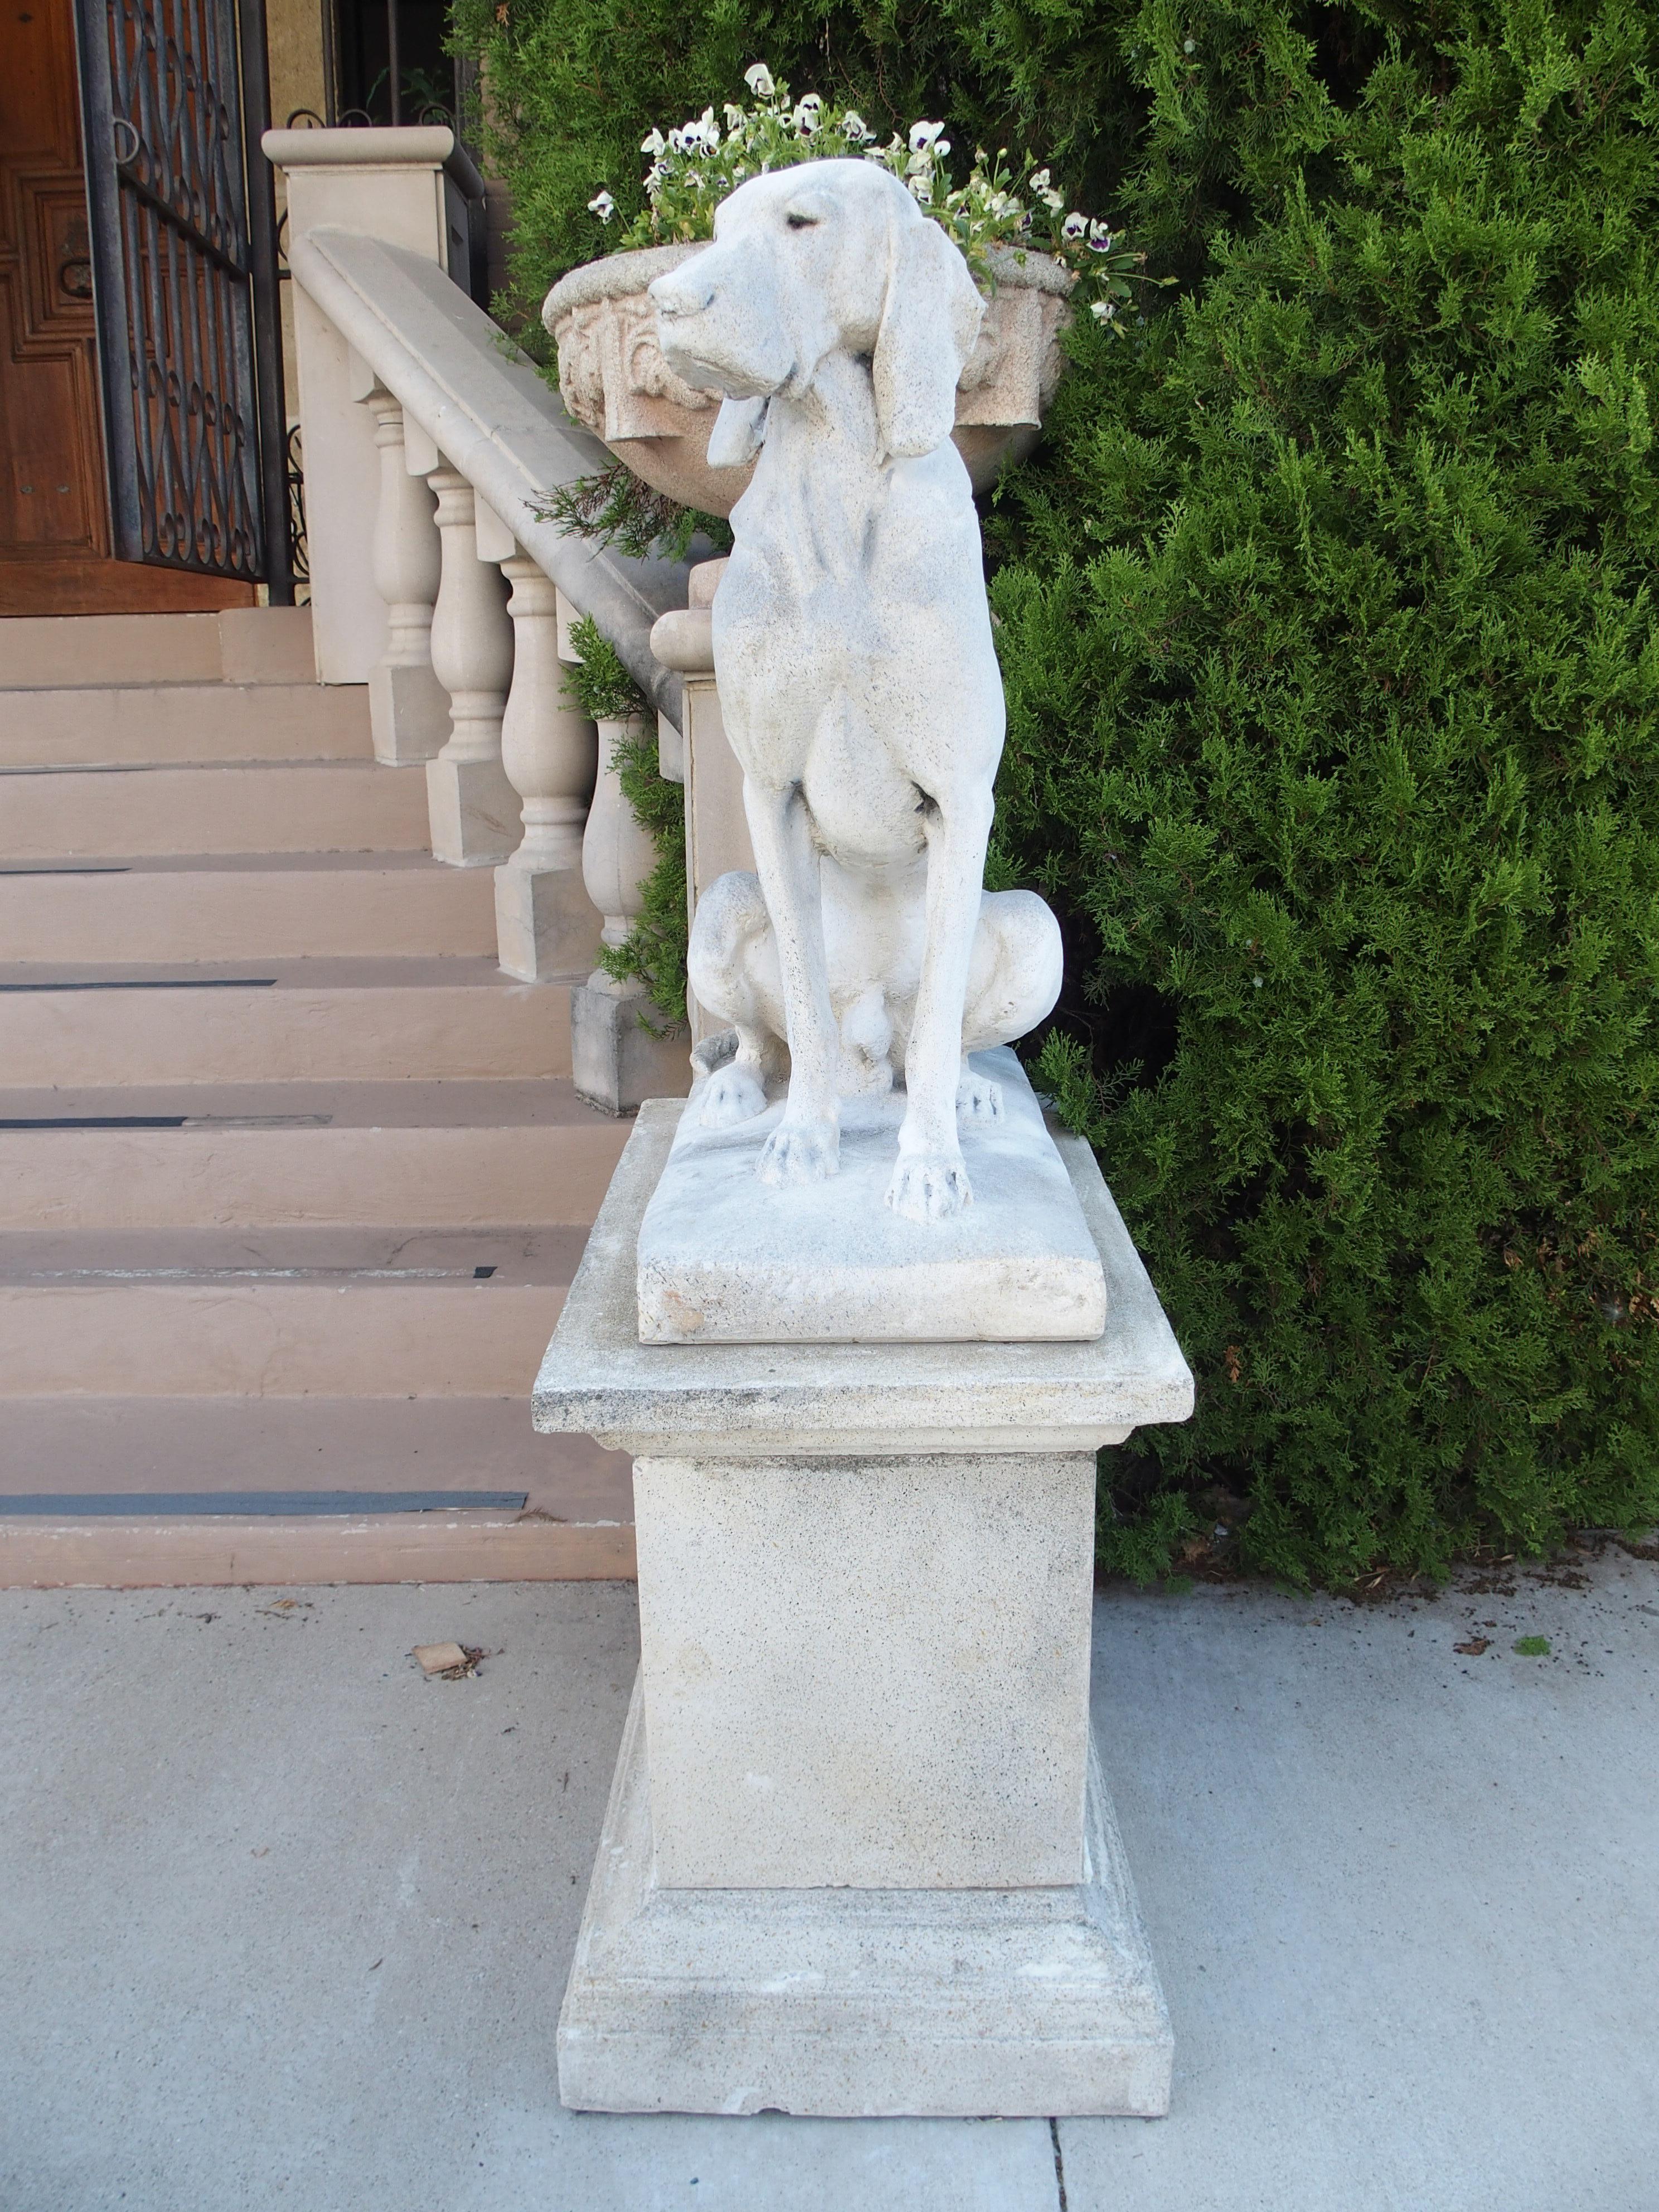 After the original 19th-century hand-carved statues by Alfred Jacquemart, this pair of cast stone European pointers sit atop three-piece rectangular pedestals with several layers of molding. The reconstituted stone has been given a light gray color